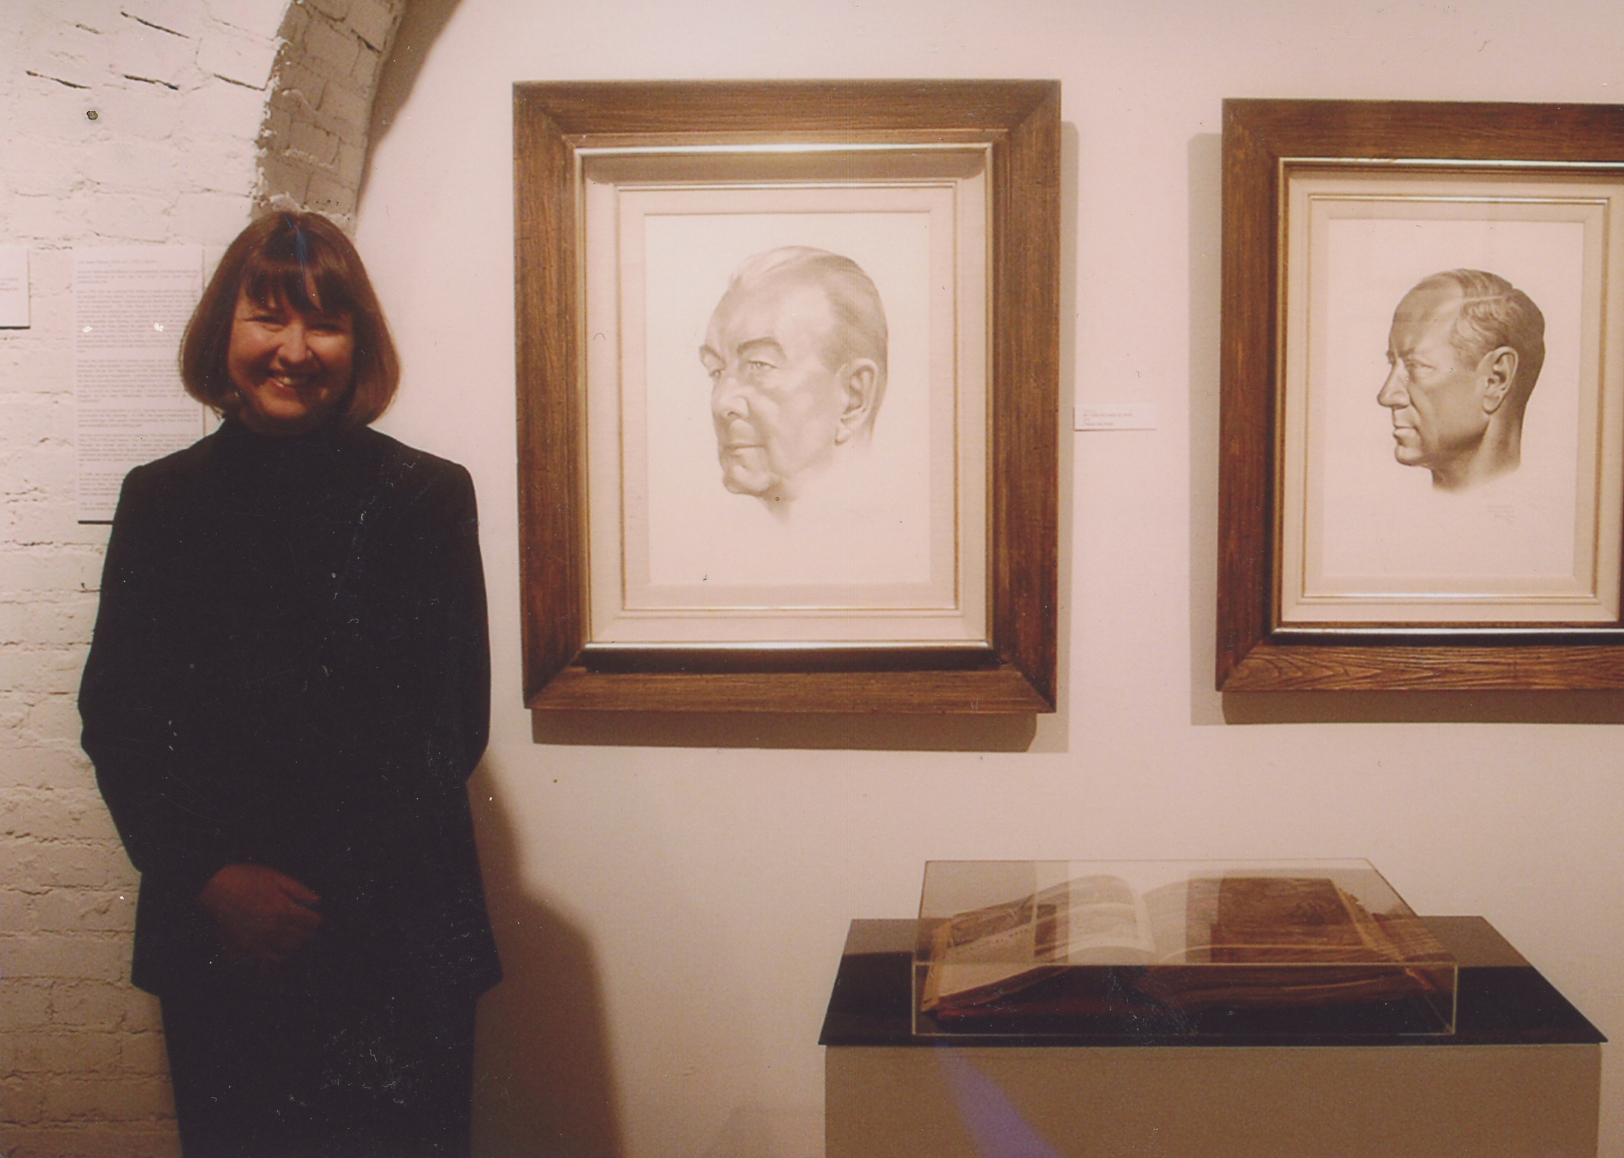 Ann James Massey at a joint exhibition of her work (Impressions of Life: Drawings by Ann James Massey) and Tom Lea’s (Abstraction and Realism: Drawings by Tom Lea) at The Adair Margo Gallery in 2006. Tom’s portrait of her great uncle General James H. Polk is on the left and the one of her great uncle Charles H. Leavell, Jr. is on the right. Below the portraits is her grandmother’s scrapbook opened to the section on Tom Lea.   Photo ©2006 Jody Polk Schwartz